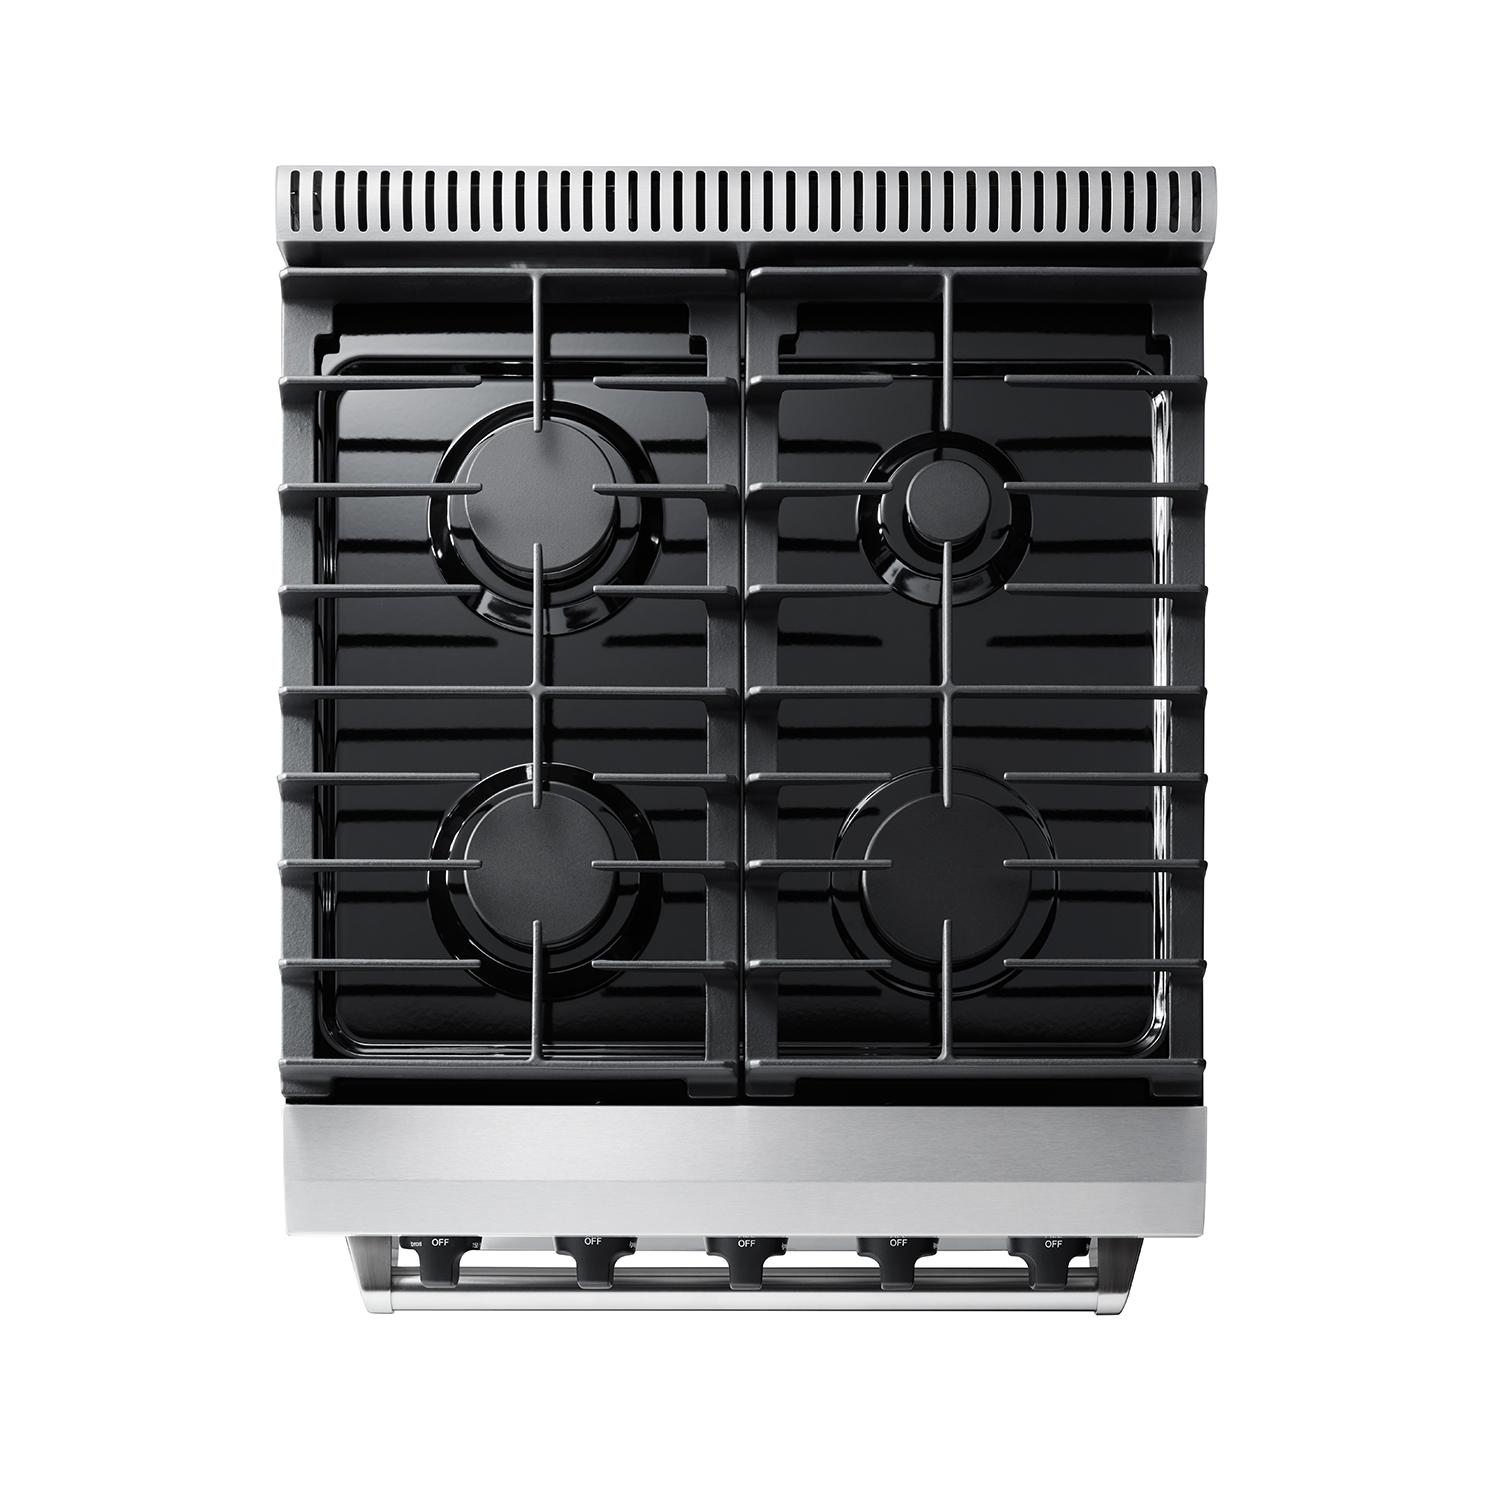 HRE2401 by Thor Kitchen - 24 Inch Professional Electric Range